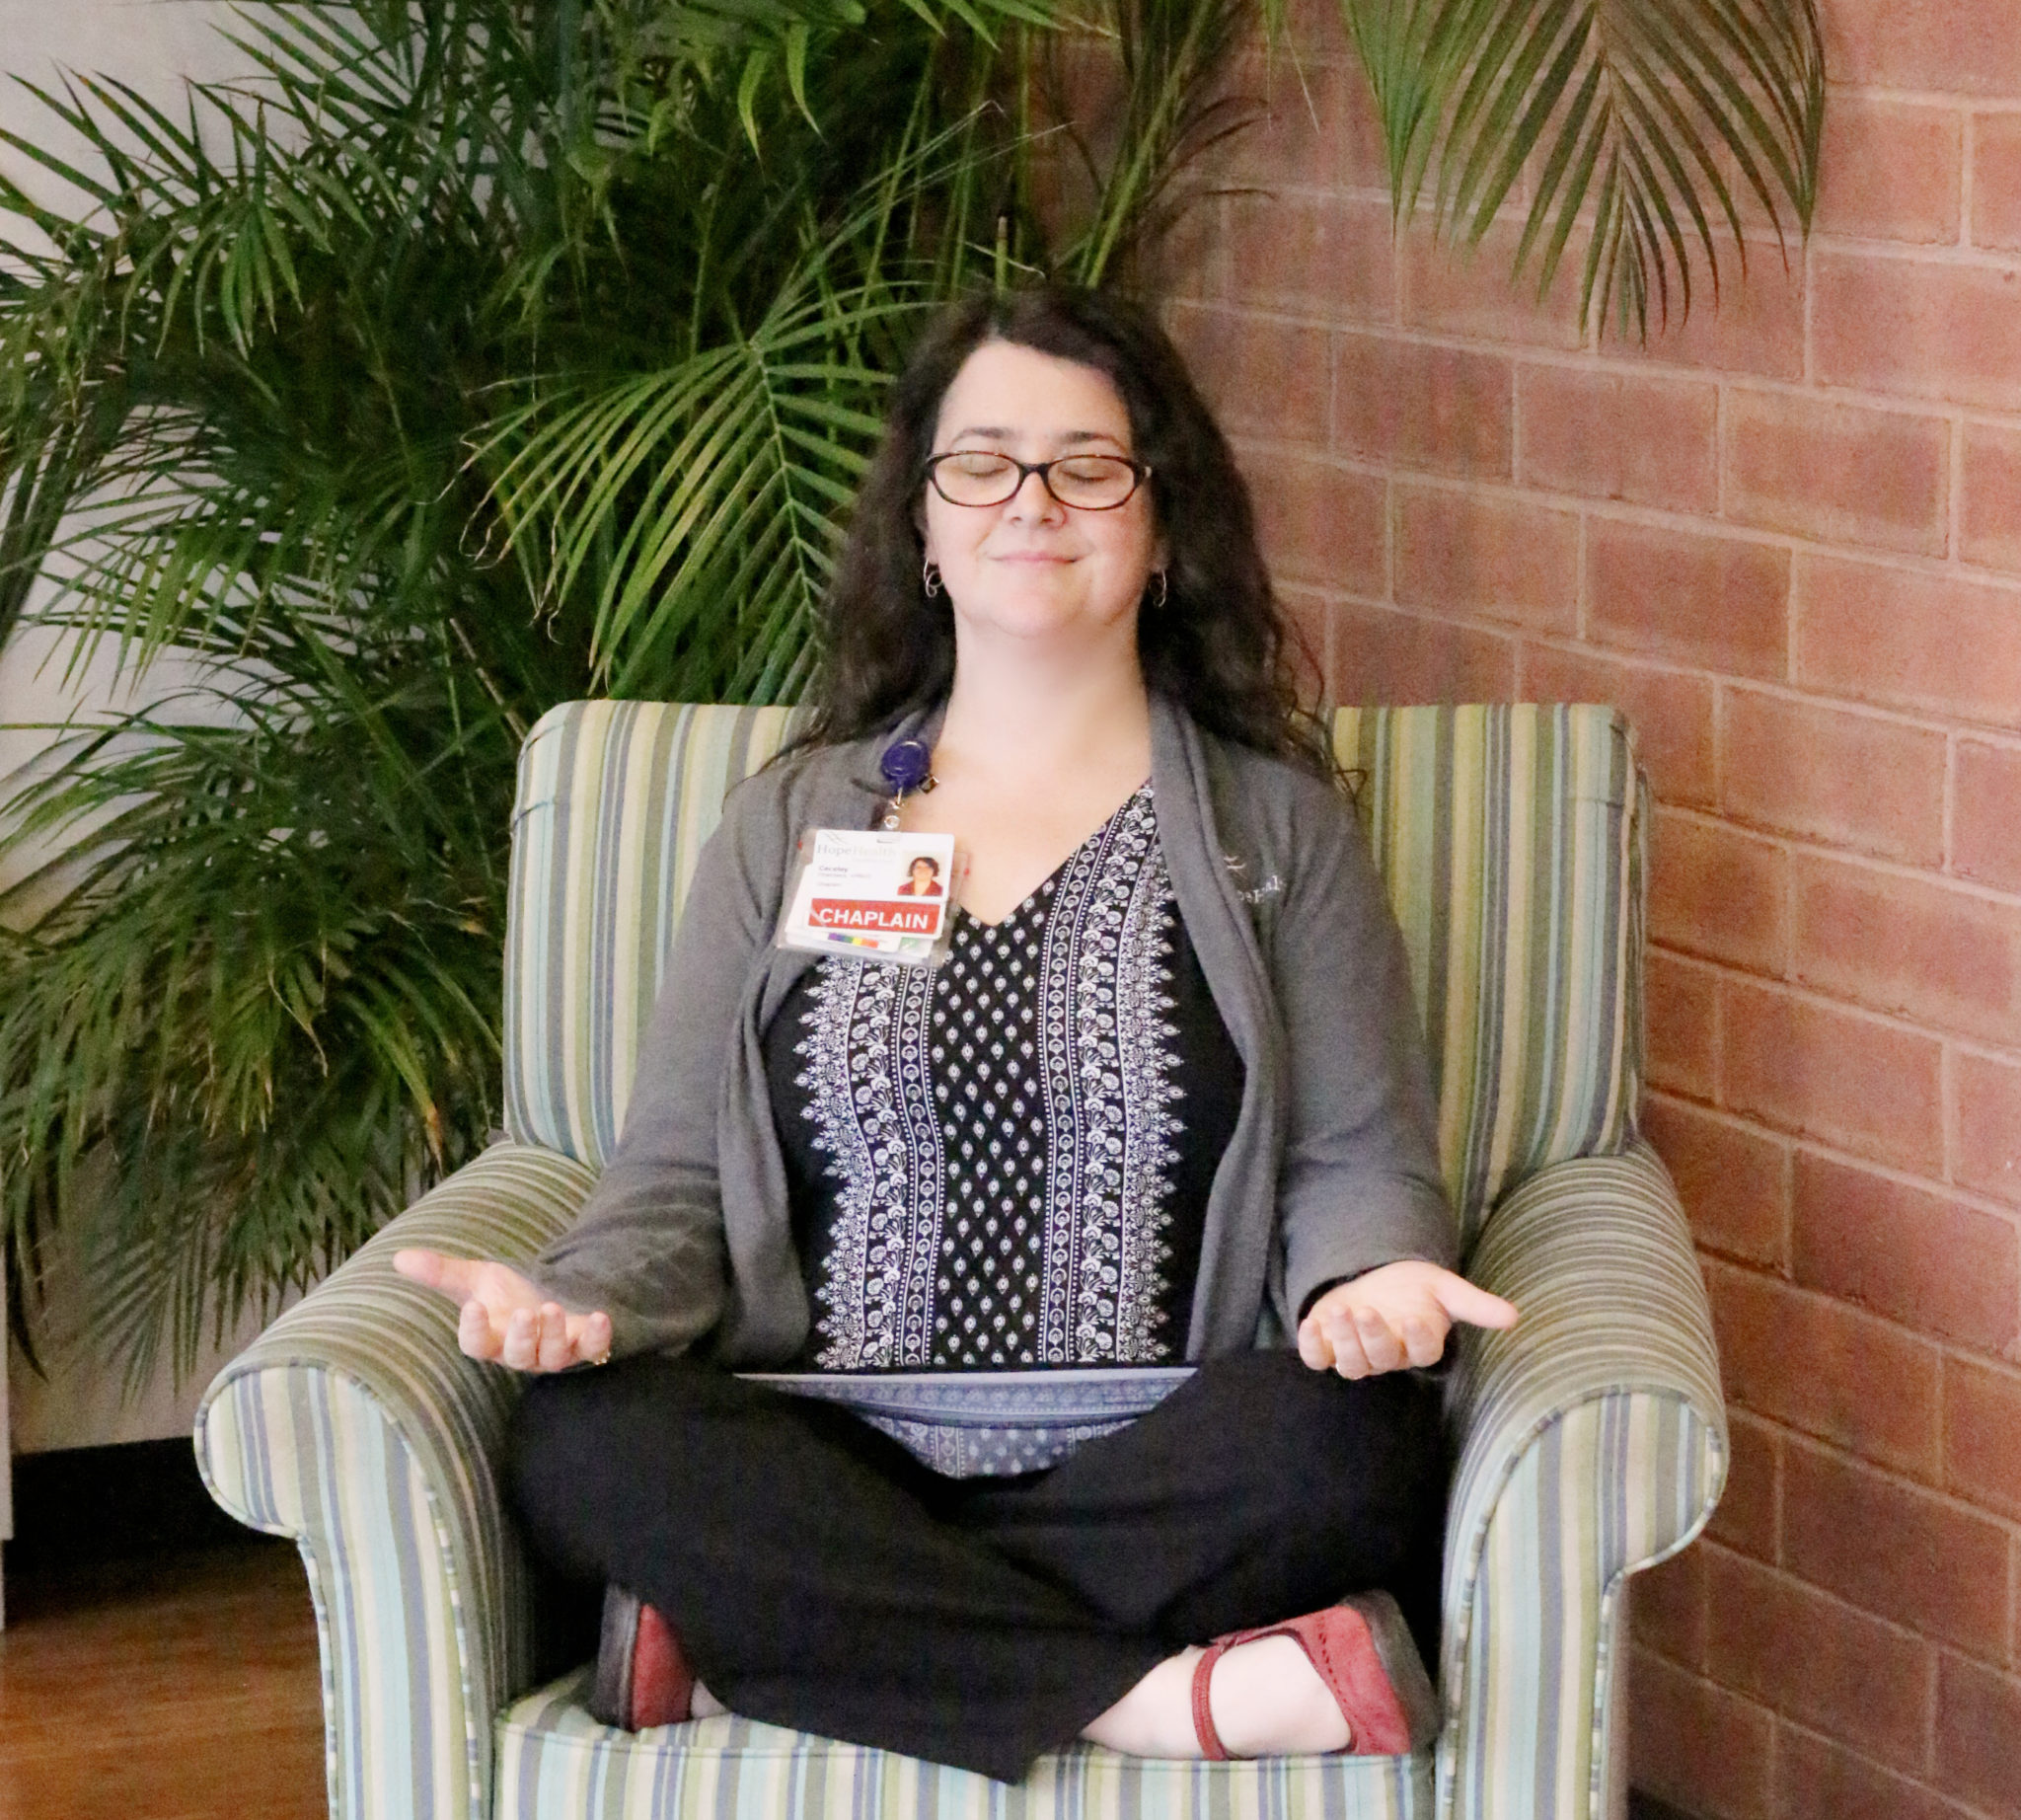 Woman meditating in chair is finding calm amidst coronavirus COVID-19